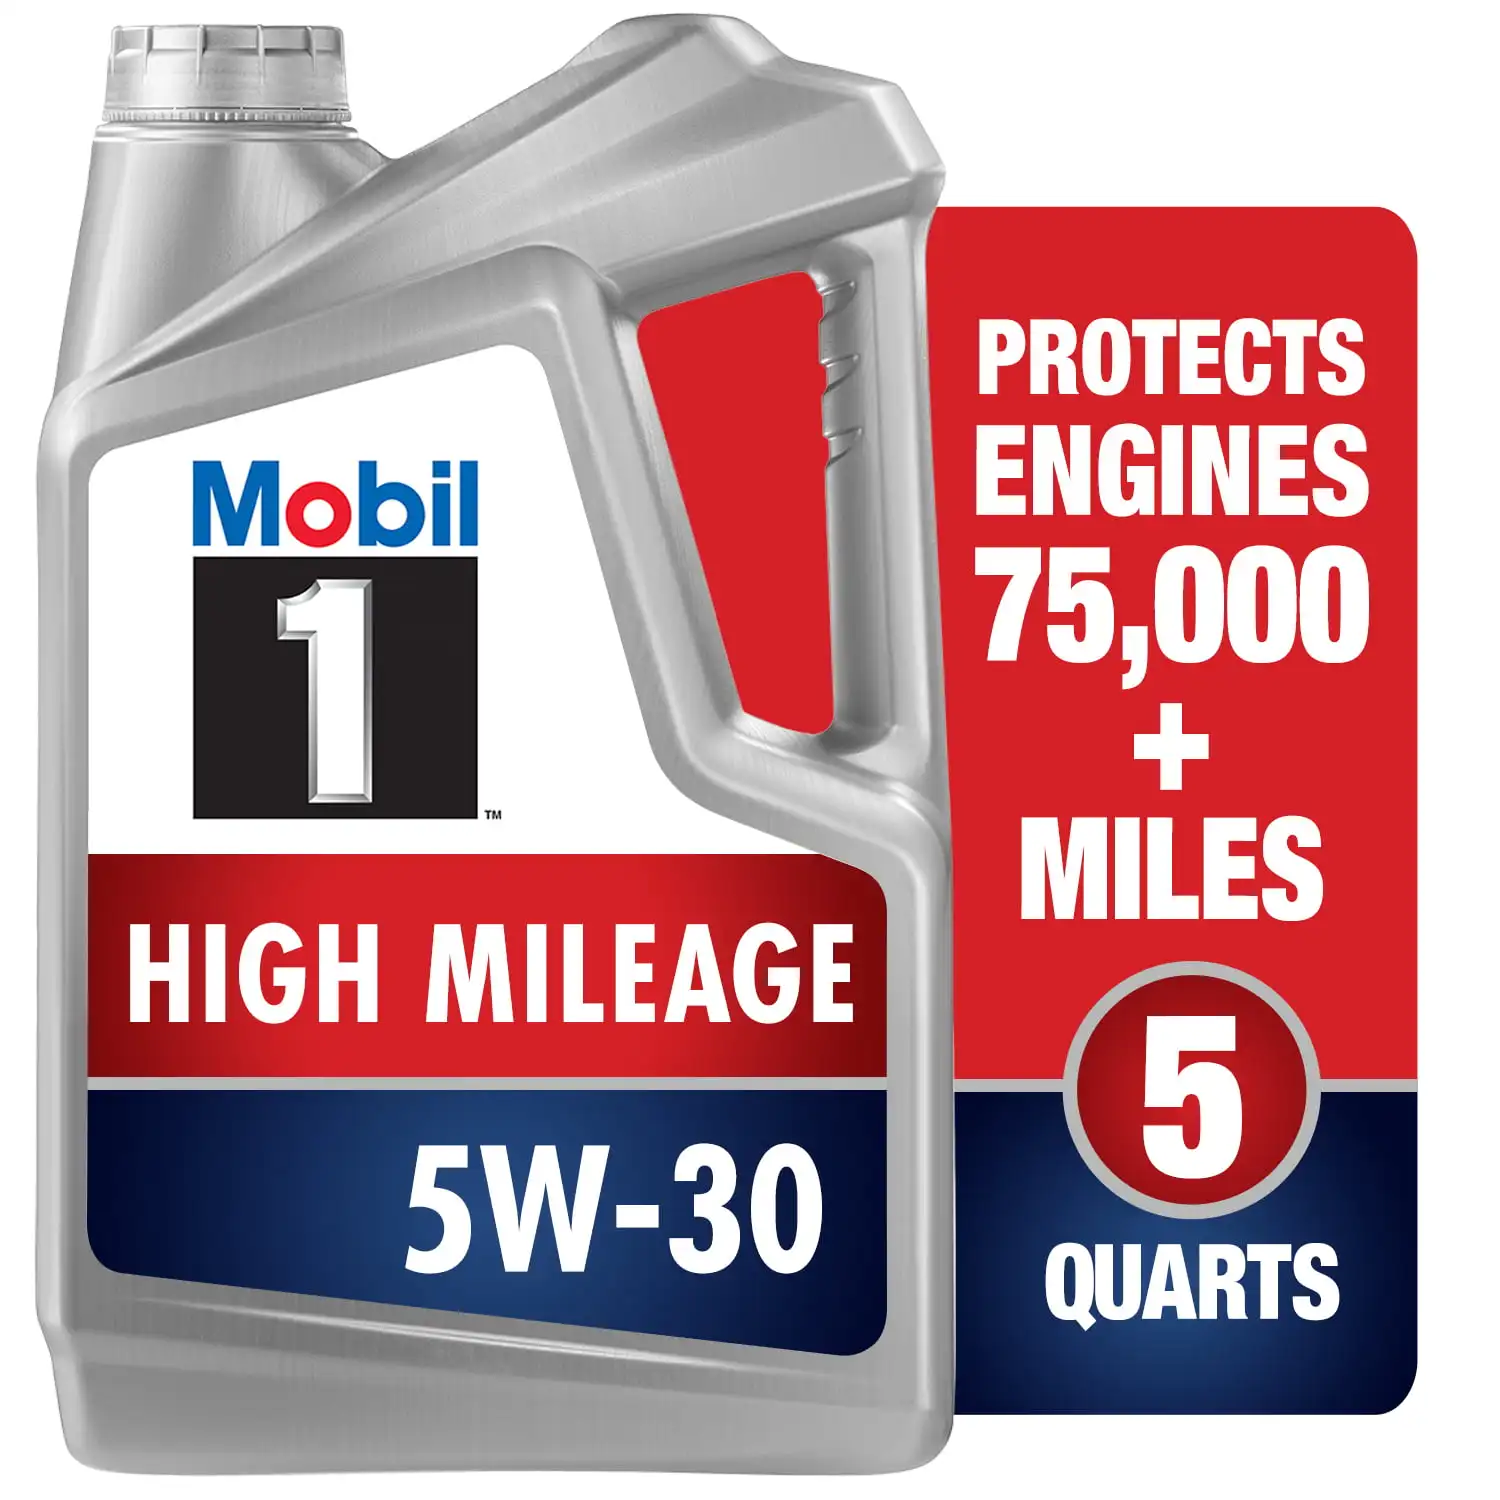 

Mobil 1 High Mileage Full Synthetic Motor Oil 5W-30, 5 qt Engine Oil Gallon Protection